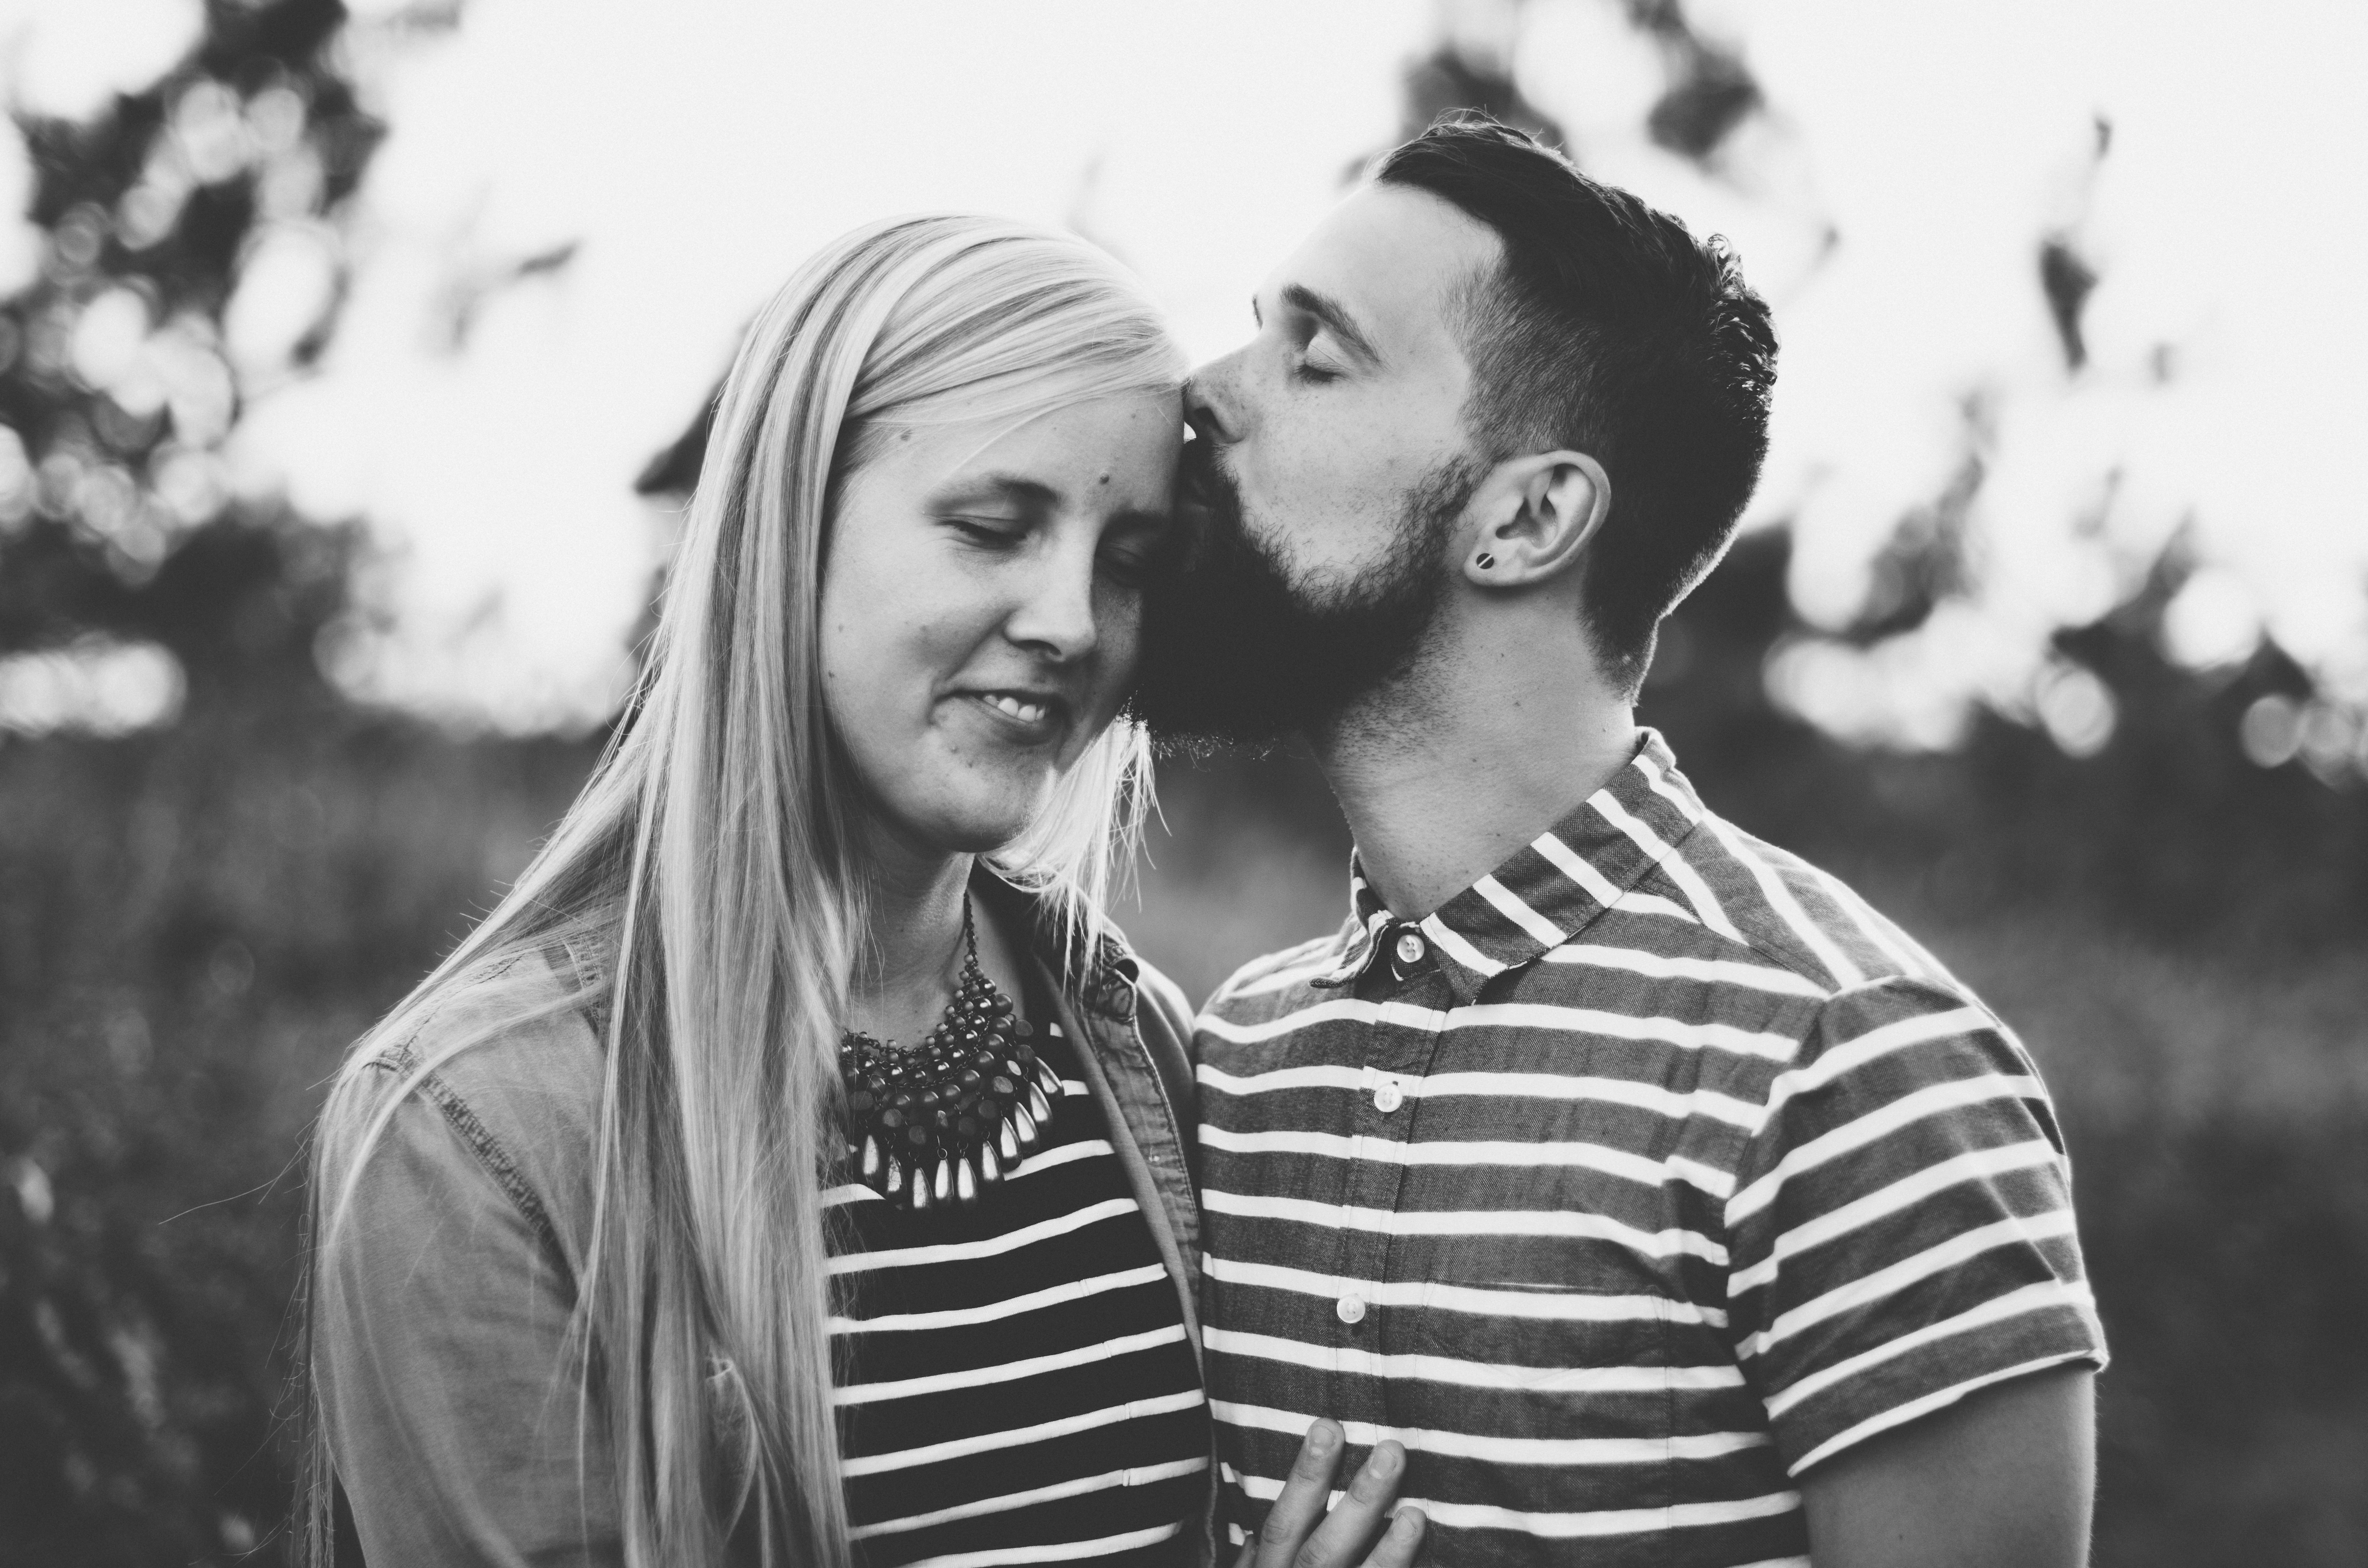 tampa engagement photography | freehearted film co